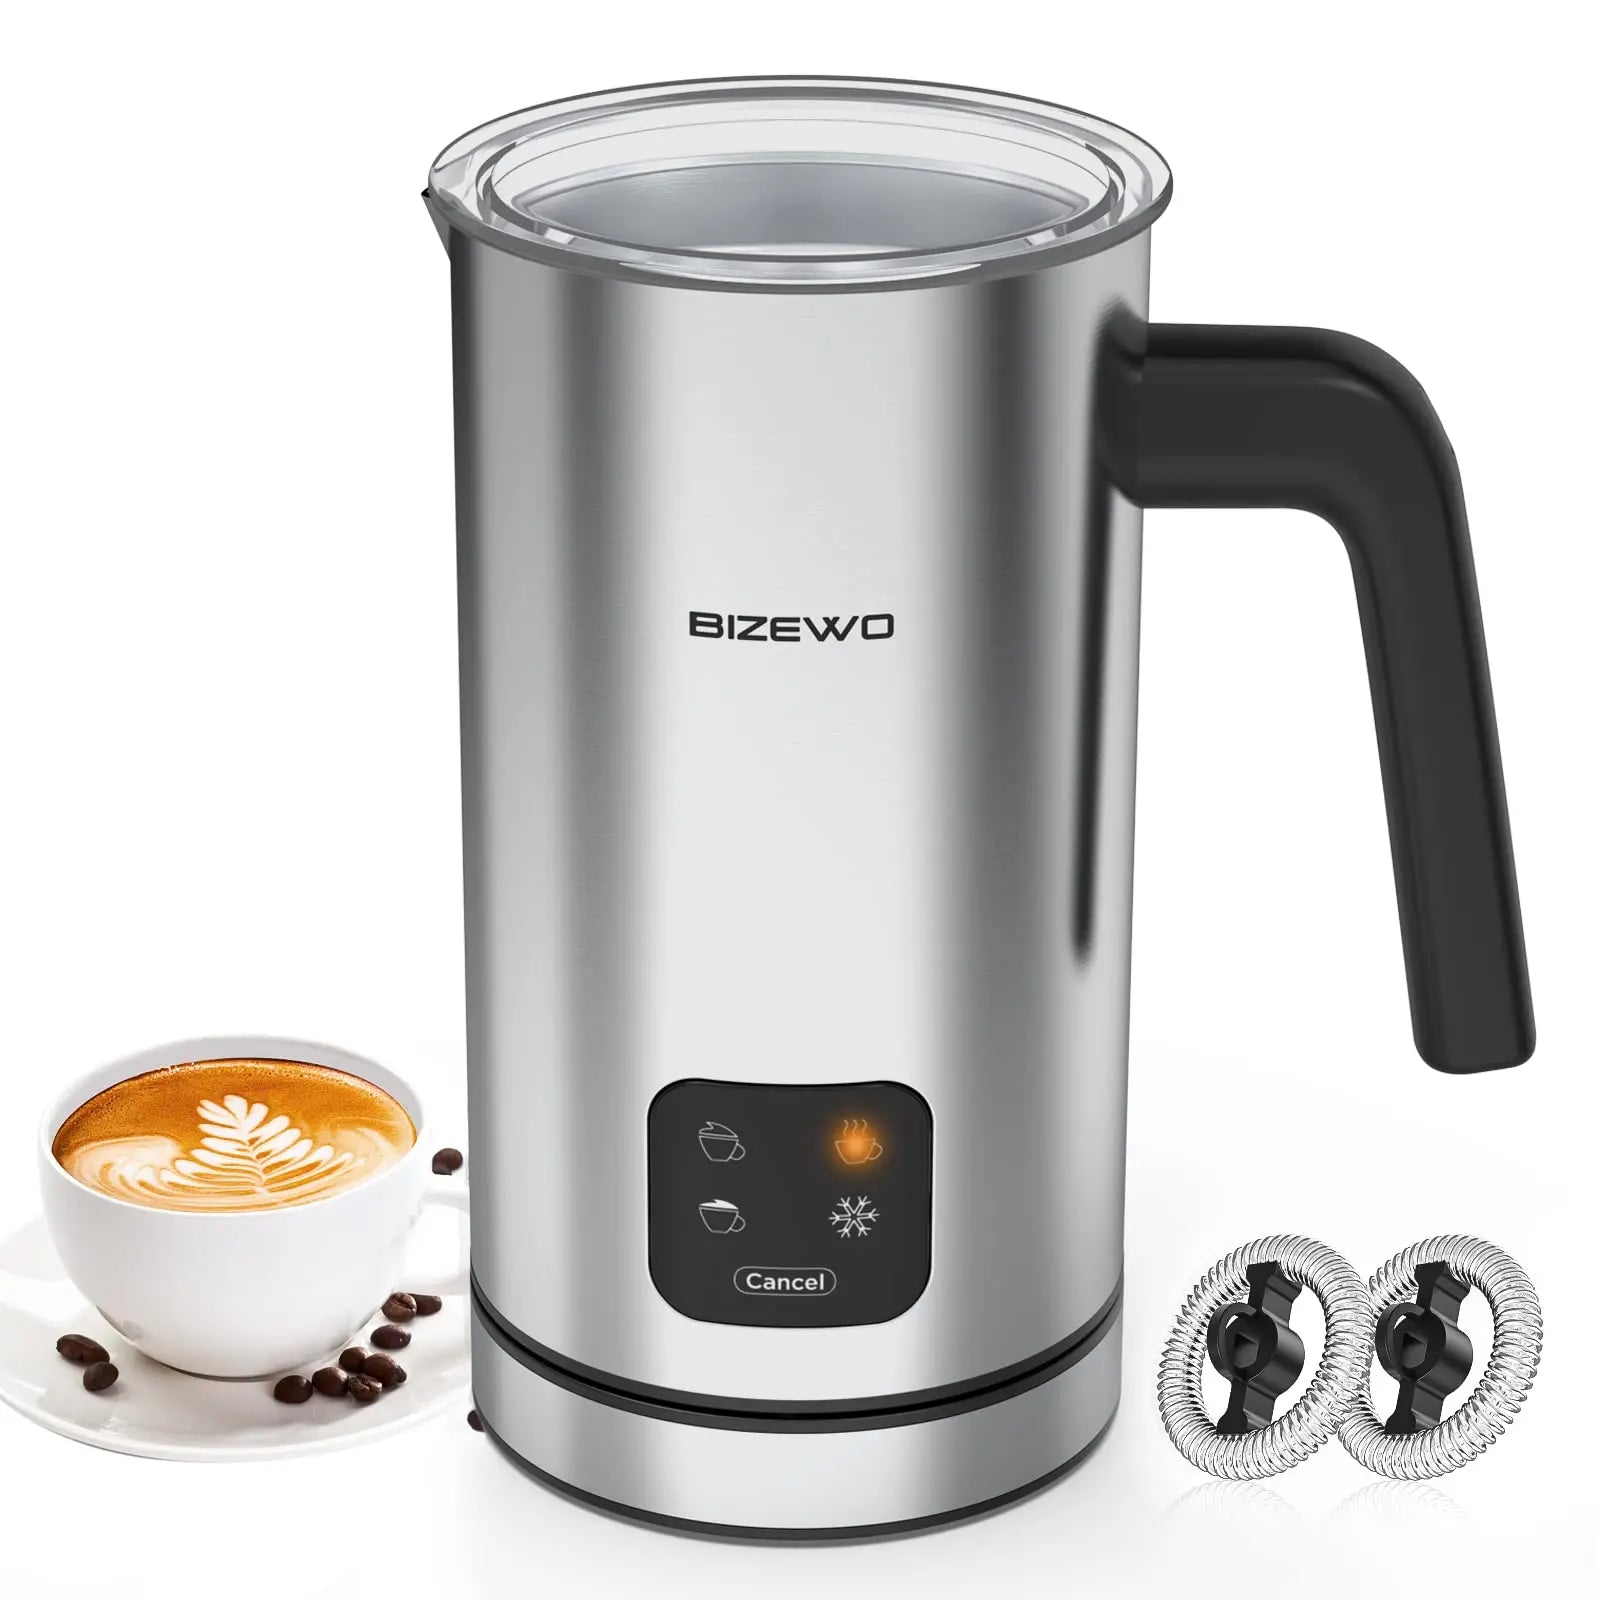 http://bizewohome.com/cdn/shop/files/Milk-Frother-and-Steamer_-Electric-Milk-Warmer-with-Touch-Screen_-BIZEWO-4-IN-1-Automatic-Stainless-Steel-Steamer-for-Coffee-_-Latte_-Hot-Chocolates-BIZEWO-1690162430866.jpg?v=1690162431